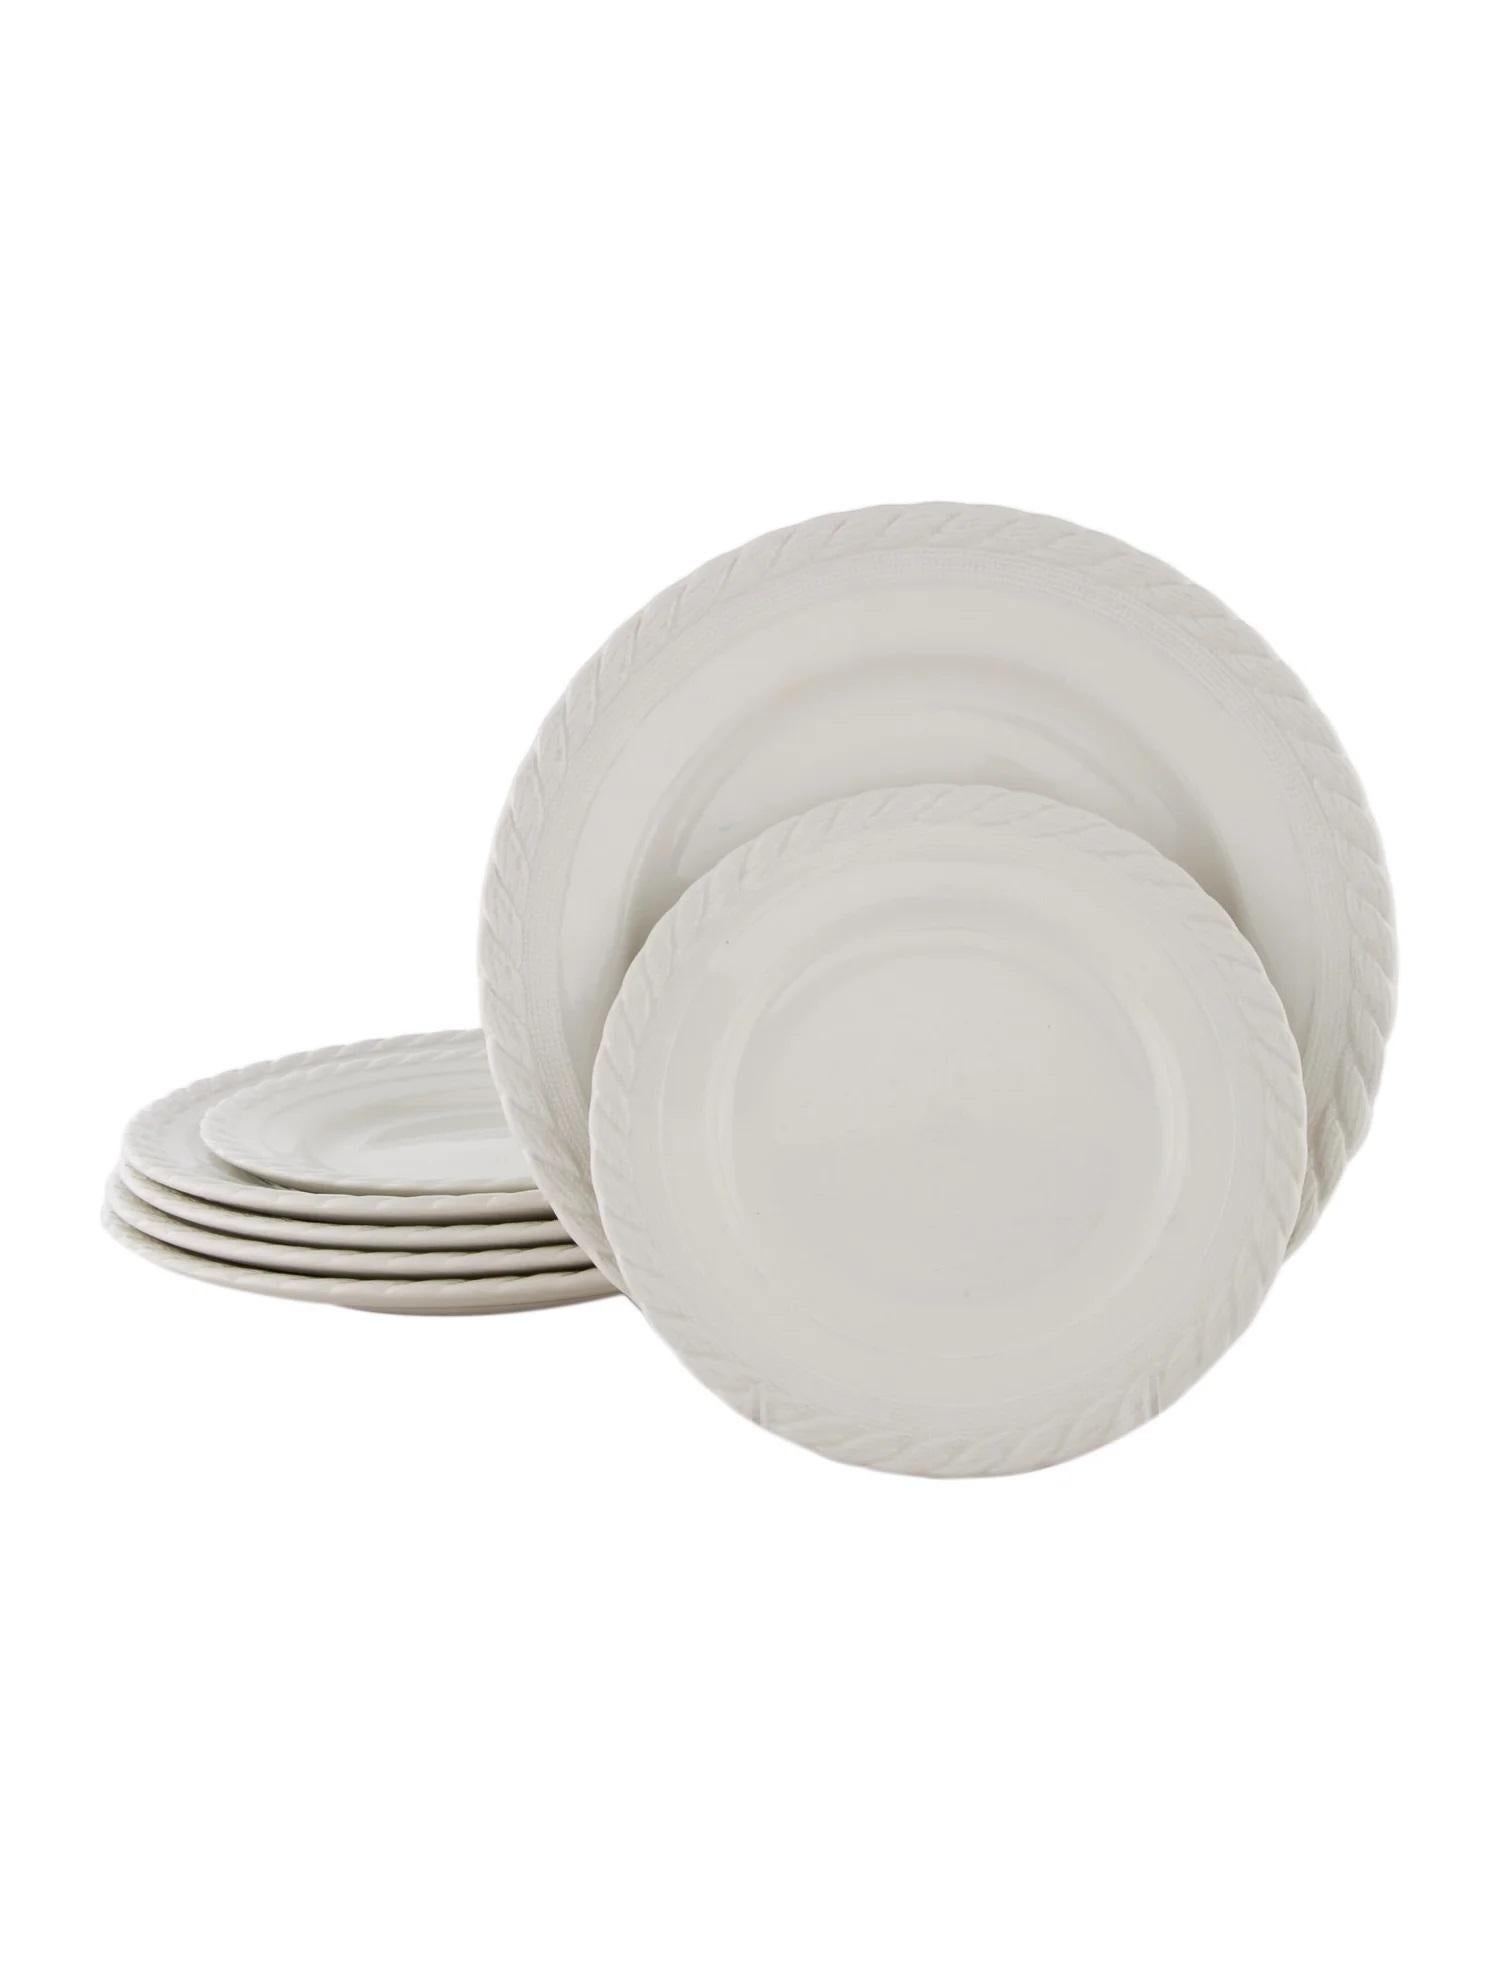 Ralph Lauren Wedgewood Clearwater Dinnerware ~ 4 Place Settings In Good Condition For Sale In New York, NY